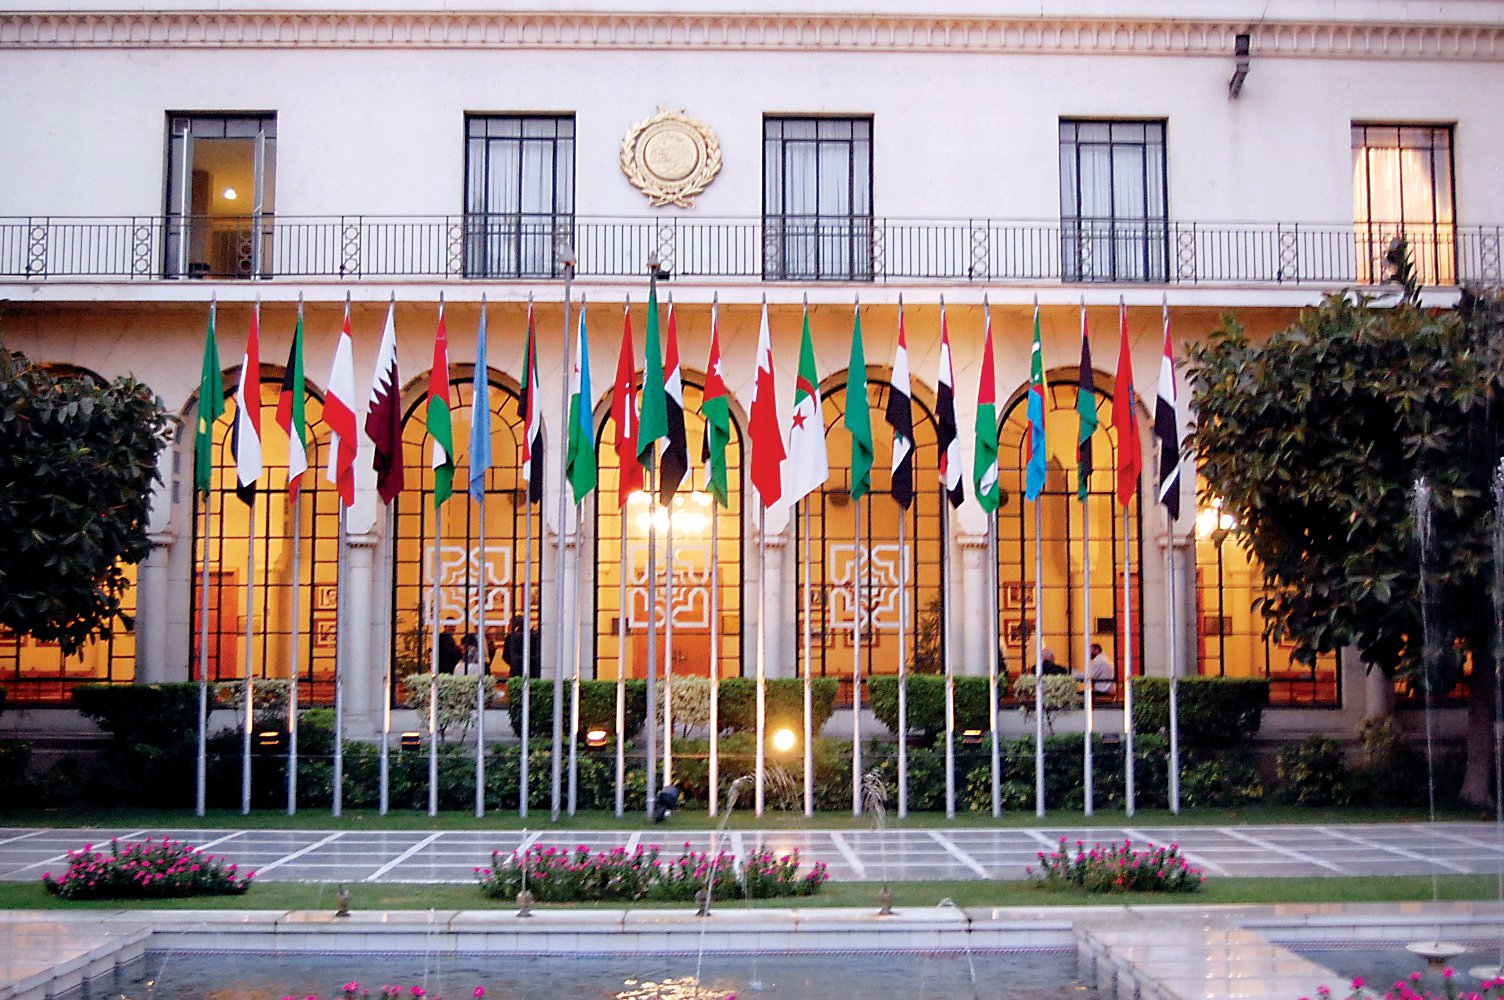 Arab League warns against targeting museums and historical heritage in countries experiencing conflict.